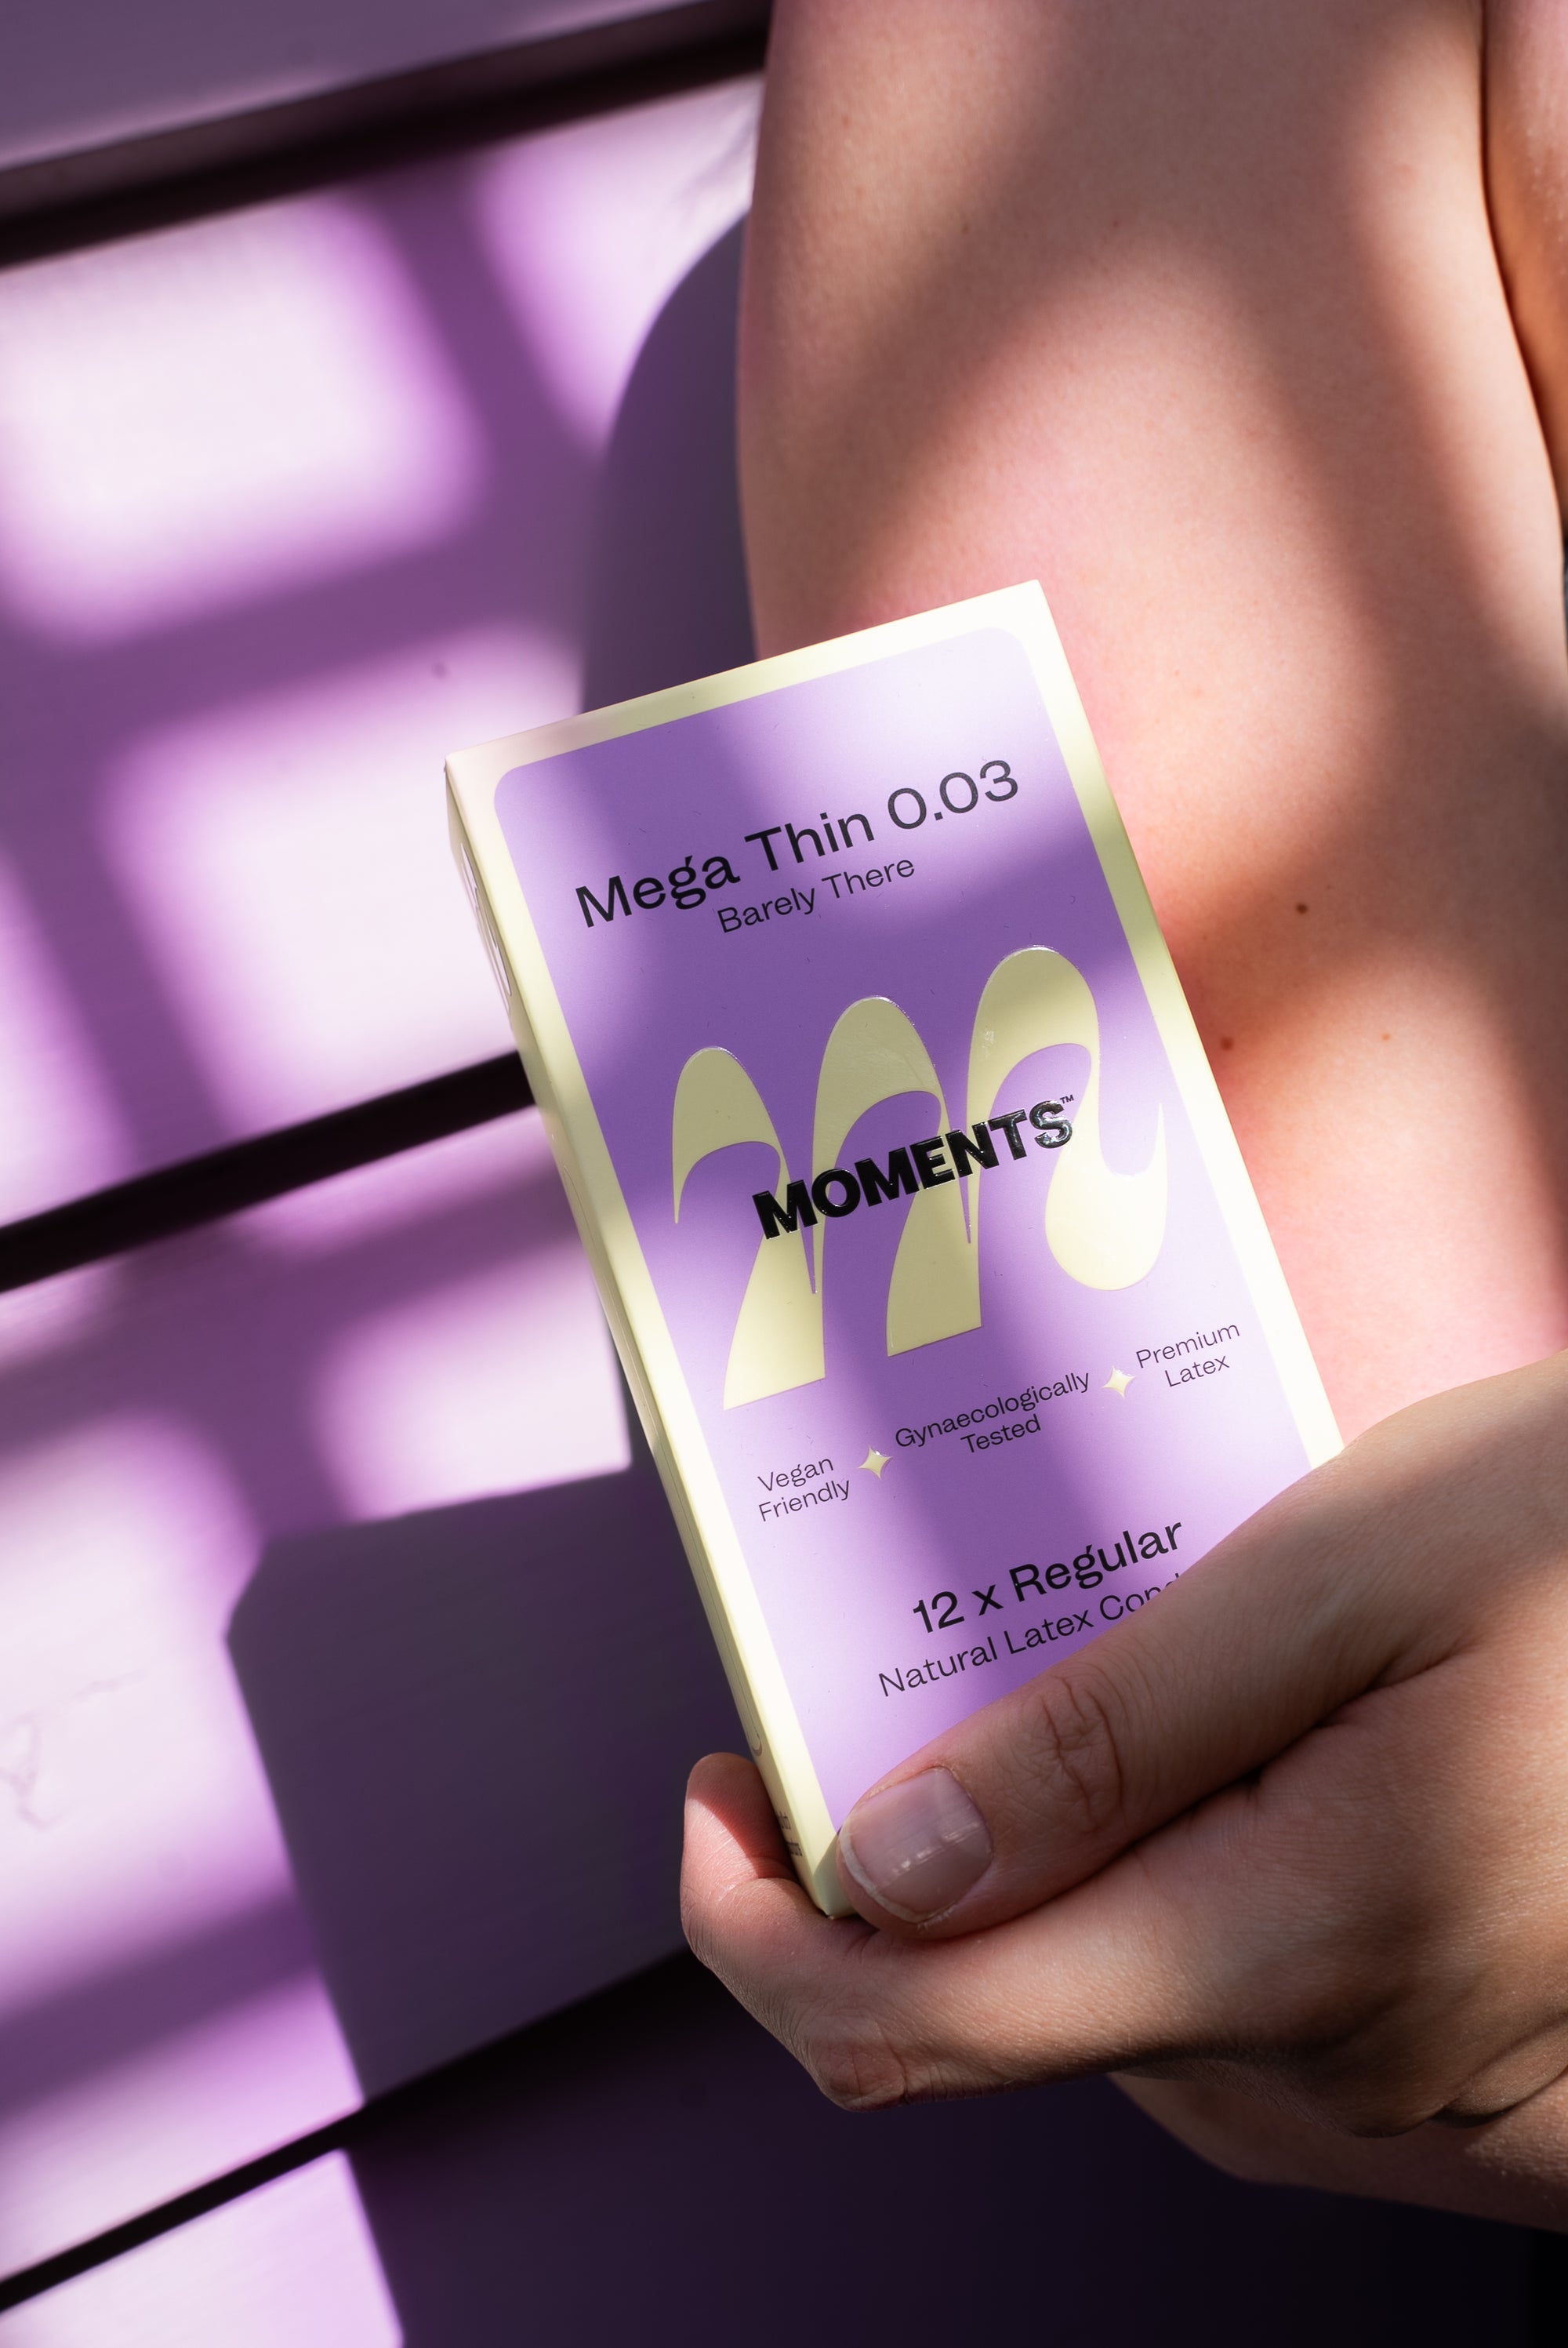 Person holding a Moments Mega Thin 0.03 condom package